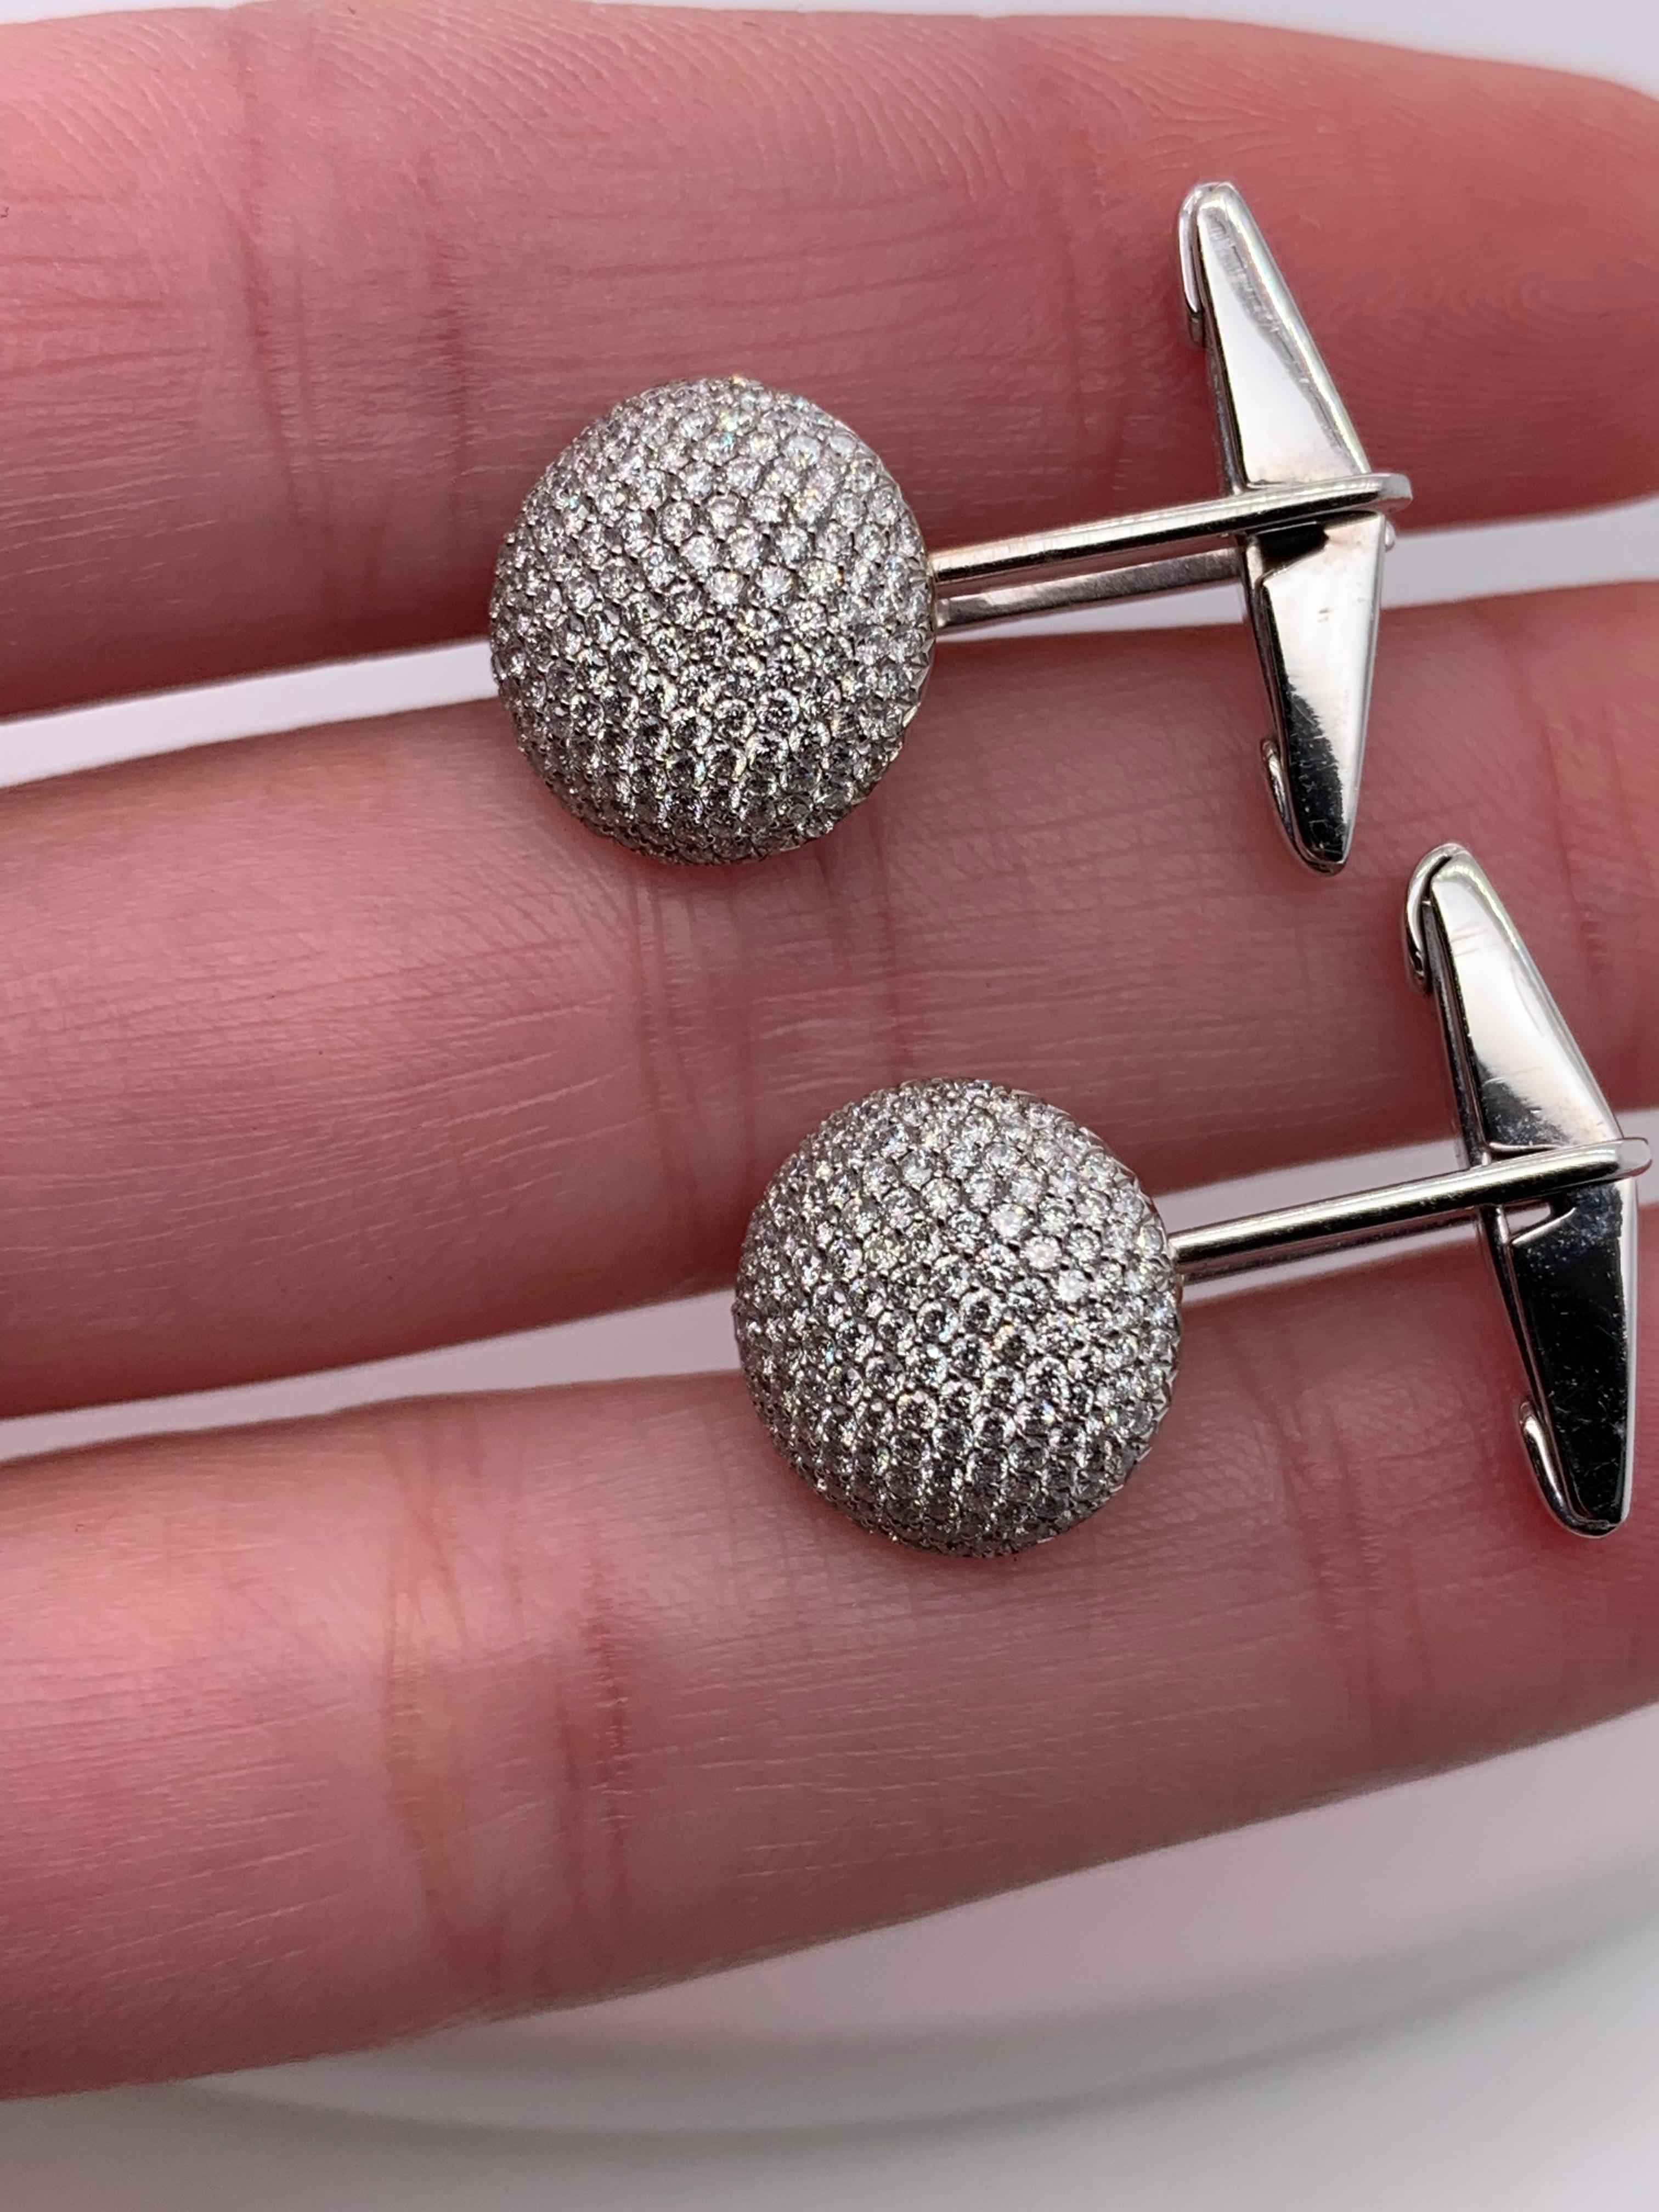 Diamond pave dome gents art deco cufflinks 18k white gold In New Condition For Sale In London, GB